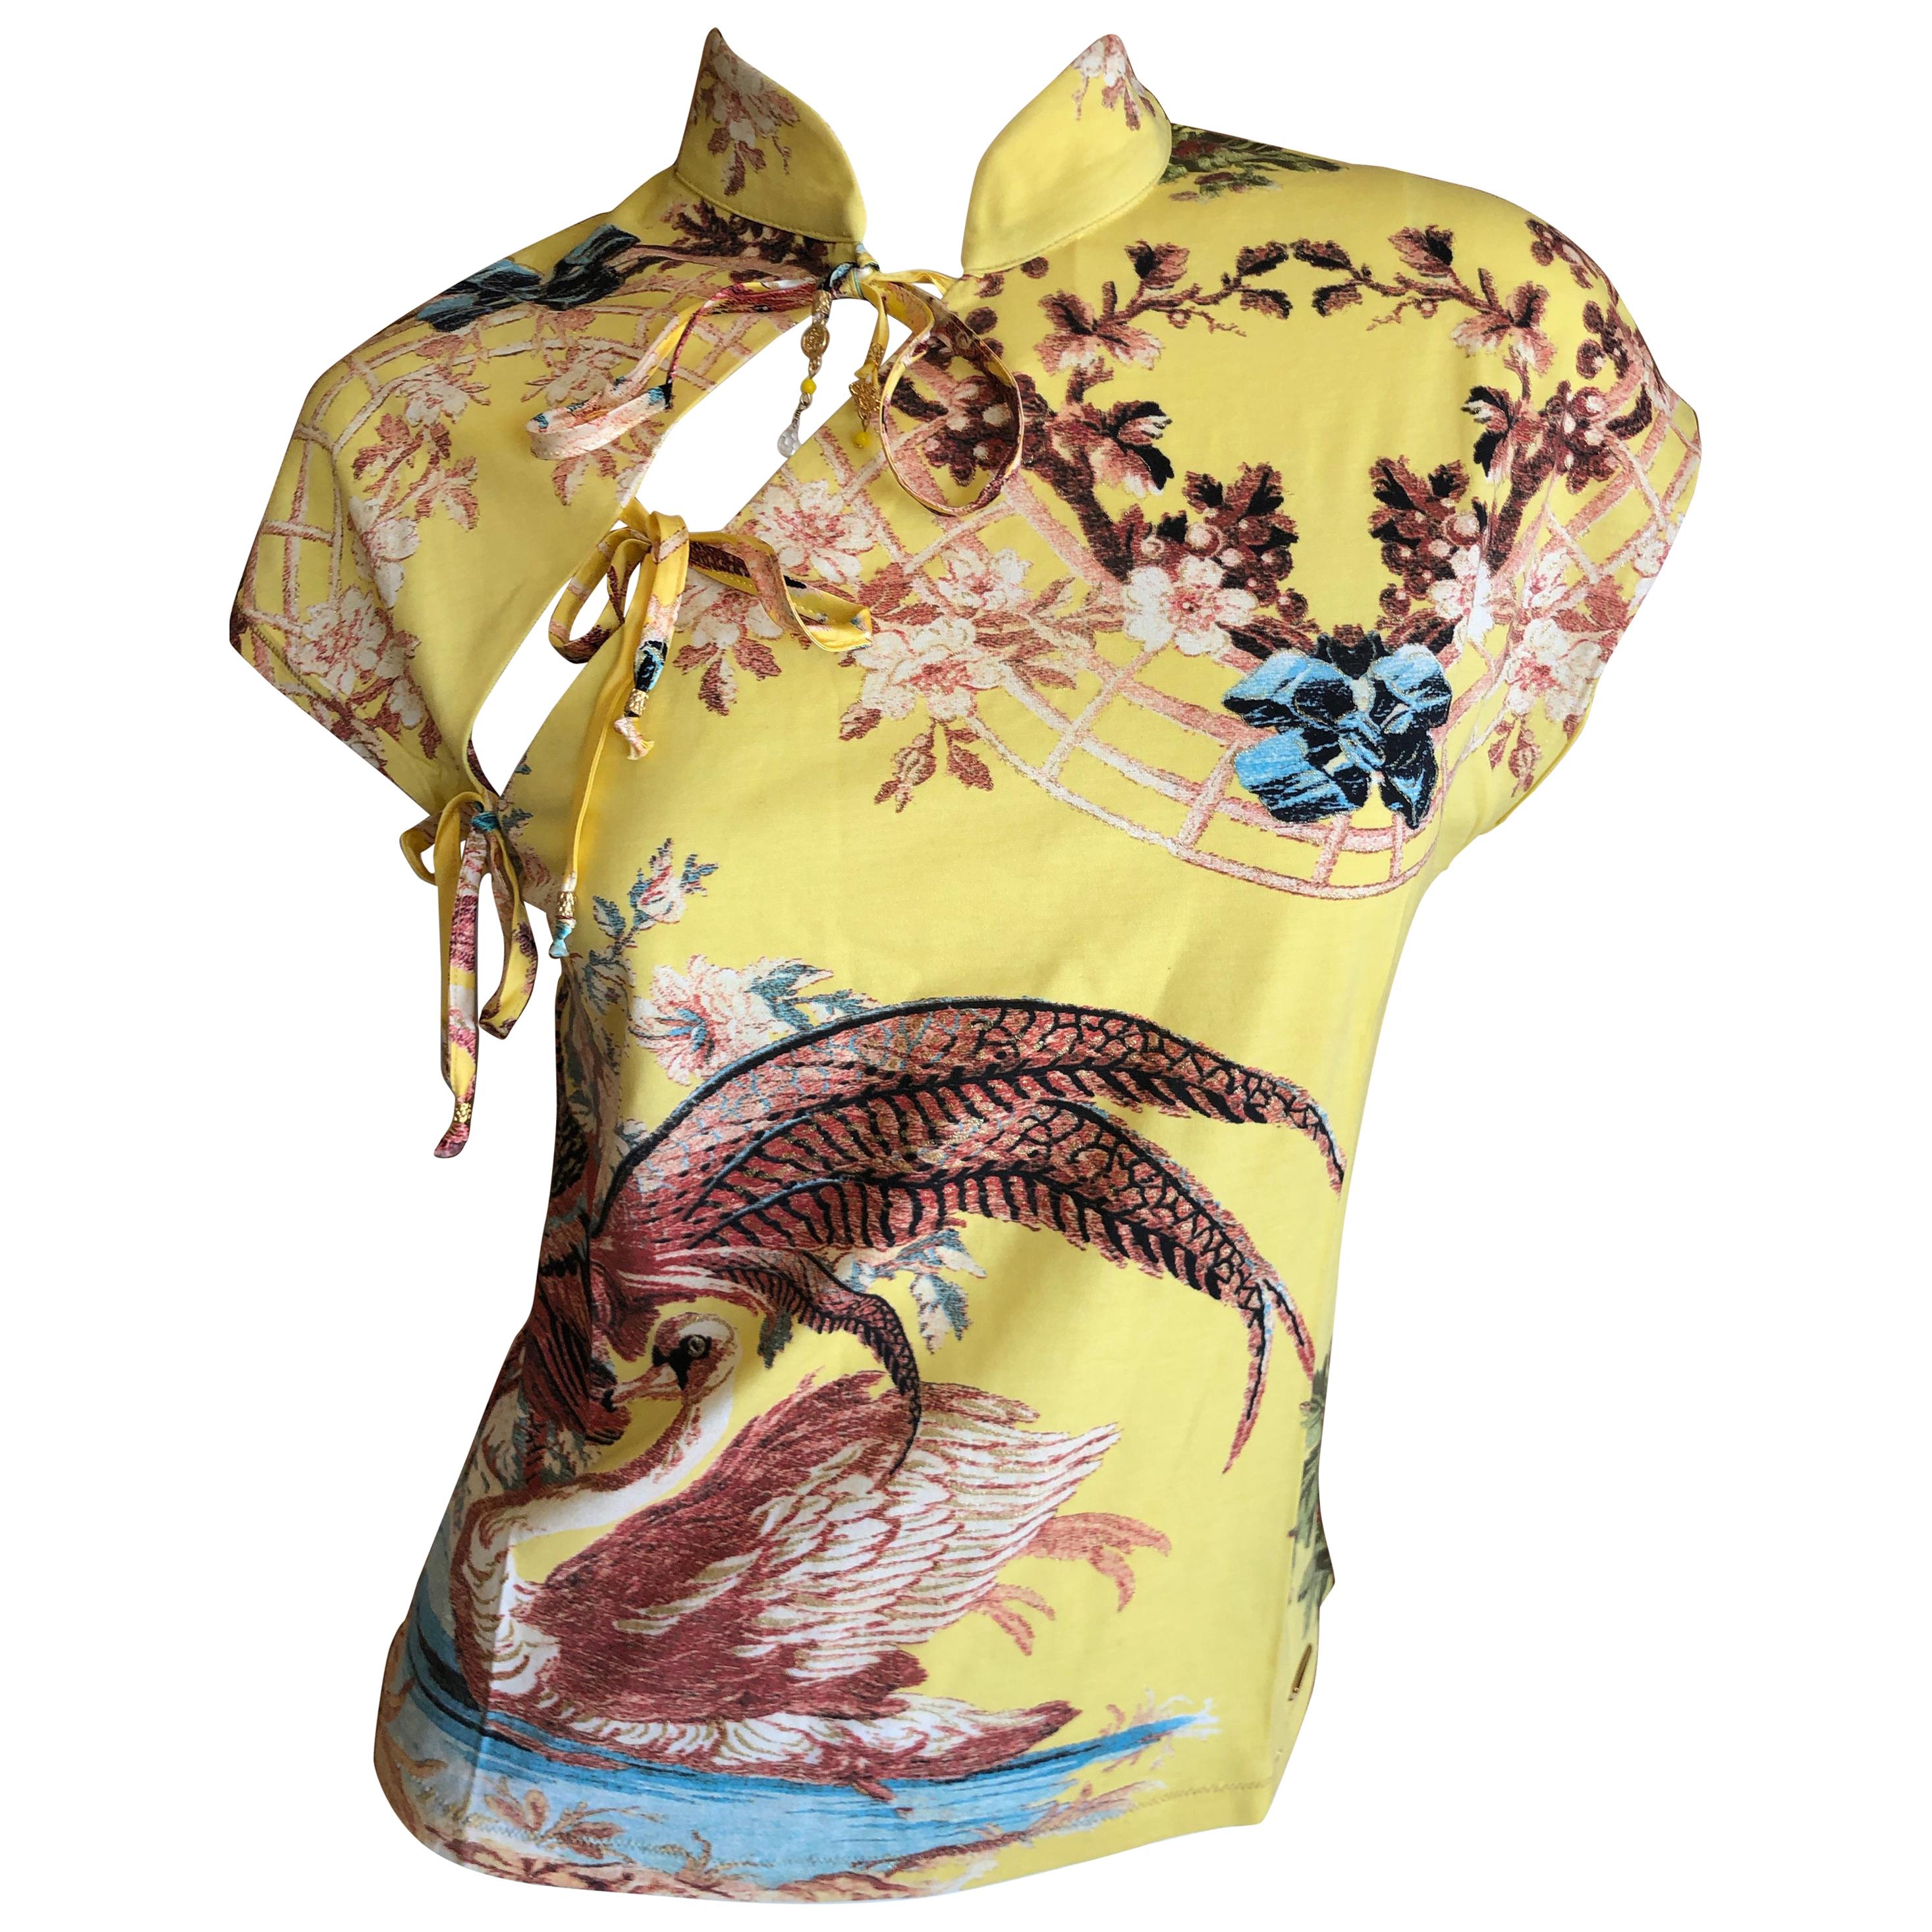 Roberto Cavalli Spring 2003 Silk Cheongsam Style Floral Top Size Large For Sale